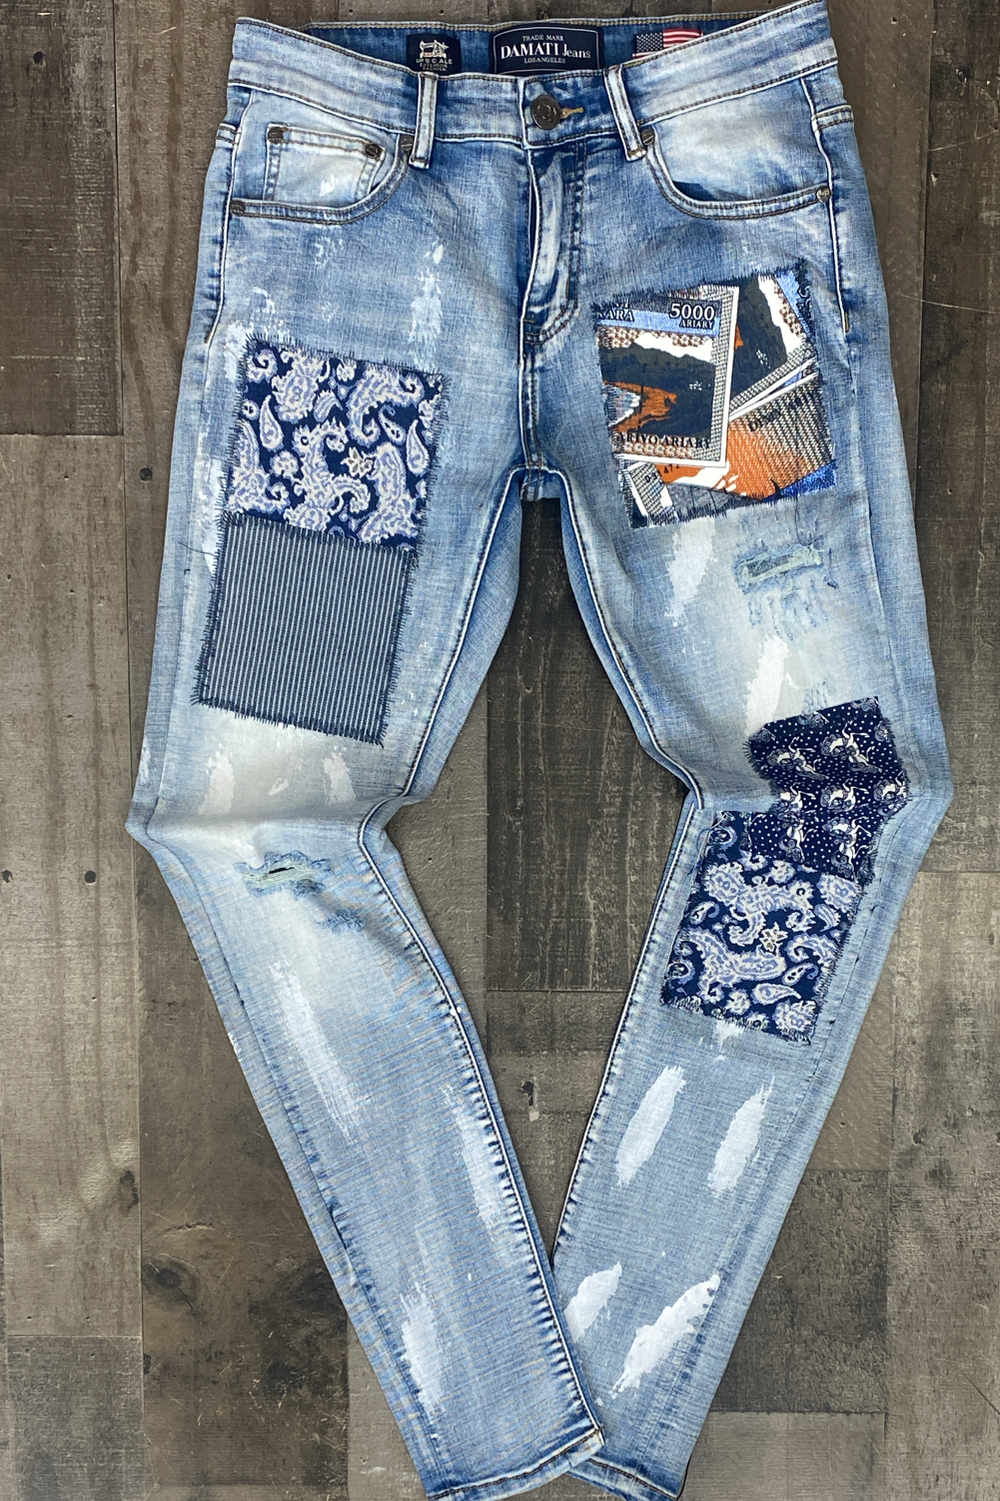 DAMATI- graphic patched jeans